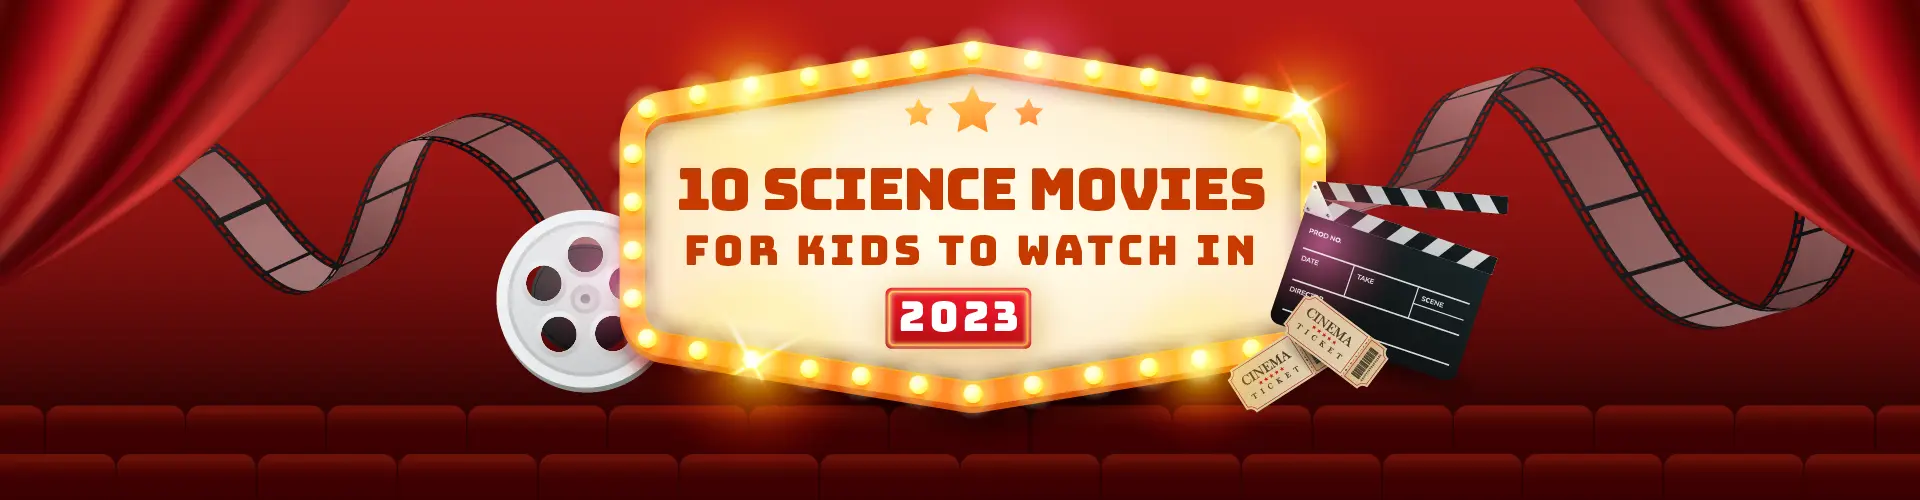 10 science movies for kids to watch in 2023